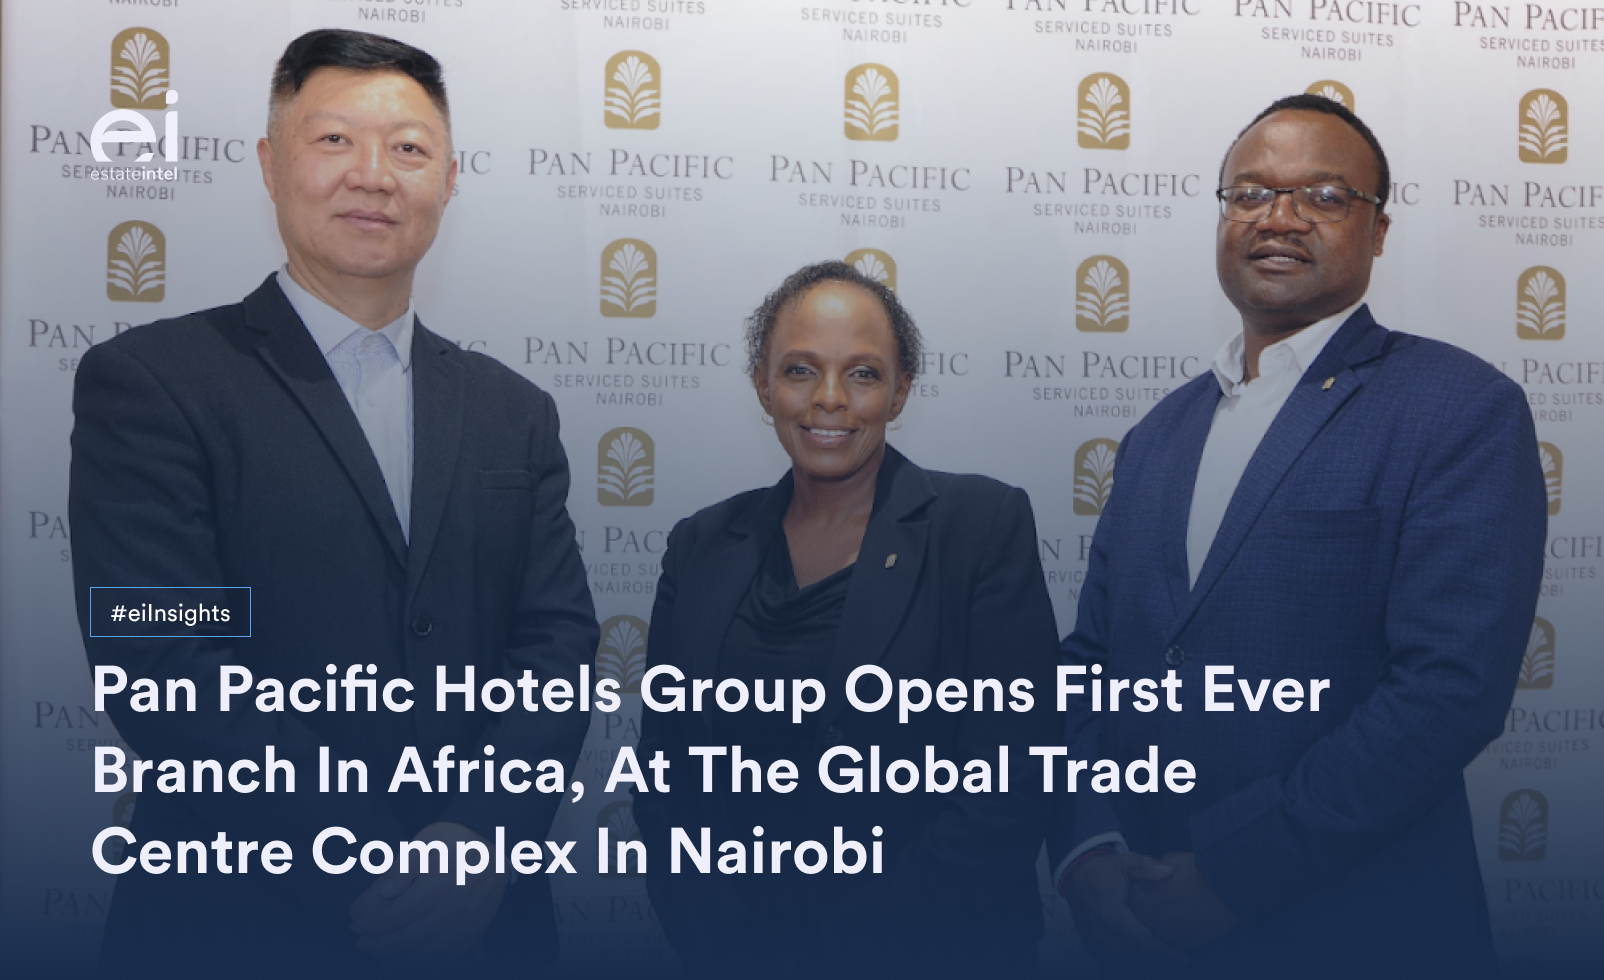 Pan Pacific Hotels Group Opens First Ever Branch In Africa, At Nairobi-Kenya